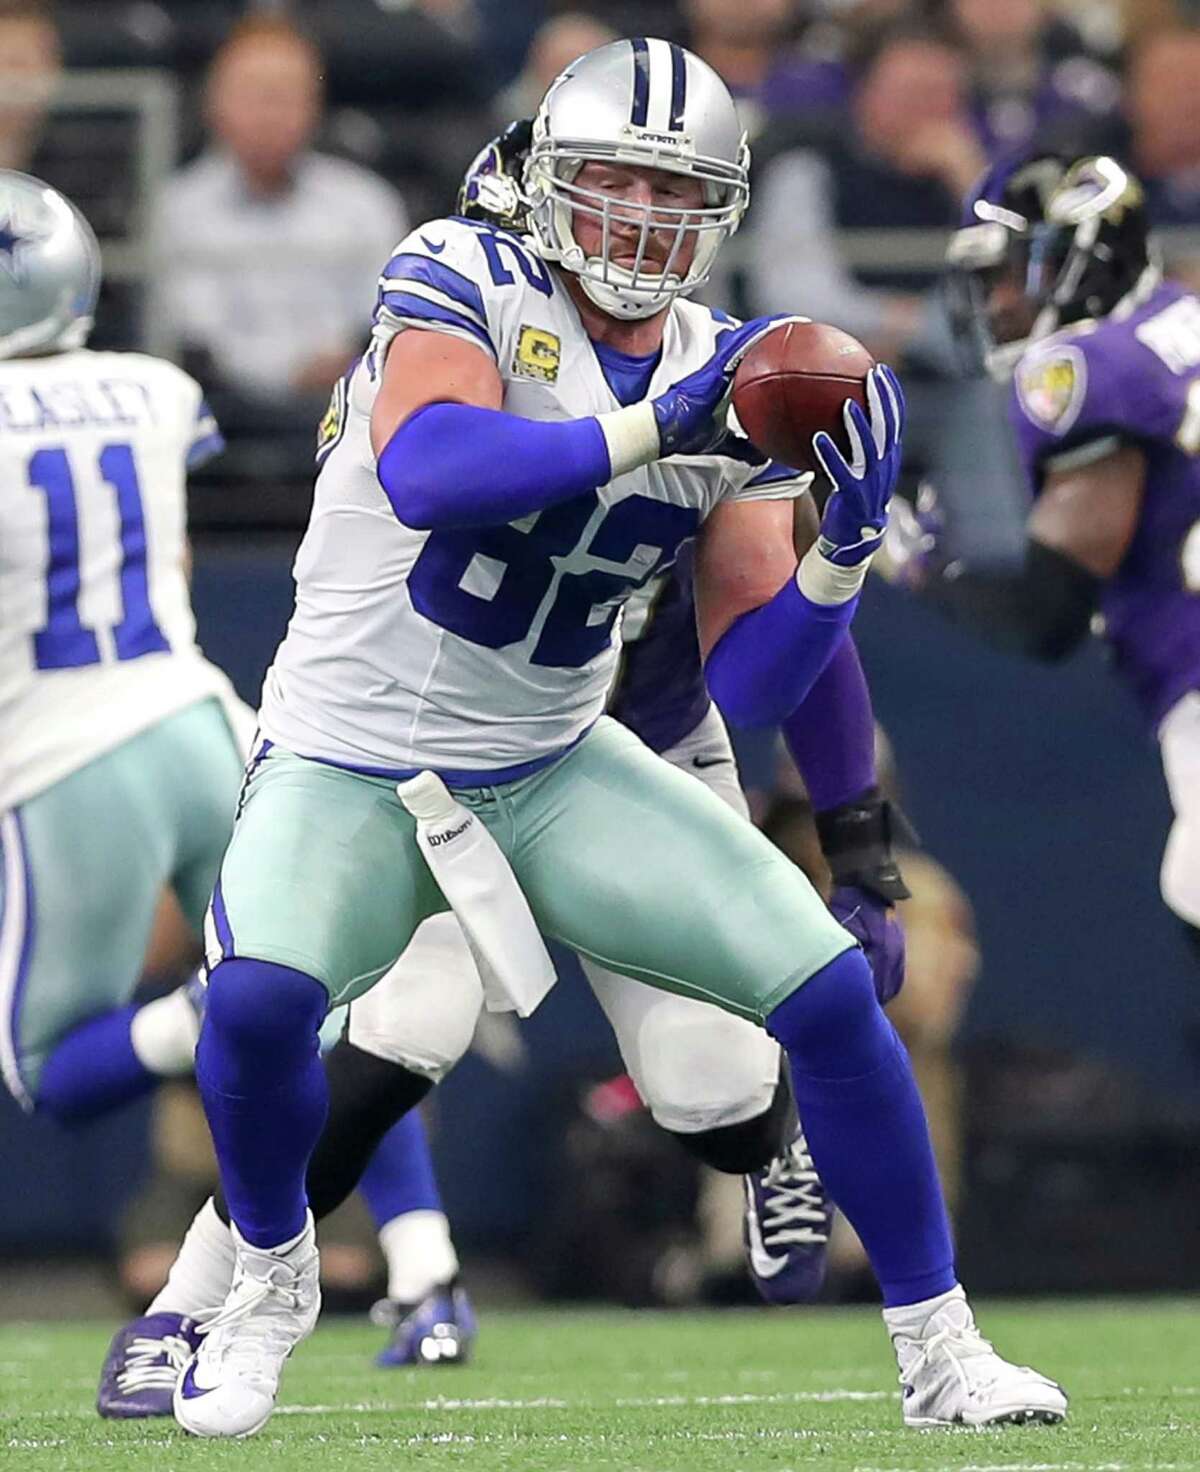 Dallas Cowboys tight end Jason Witten (82) comes up with a reception during the fourth quarter against the Baltimore Ravens on Sunday, Nov. 20, 2016 at AT&T Stadium in Arlington, Texas.